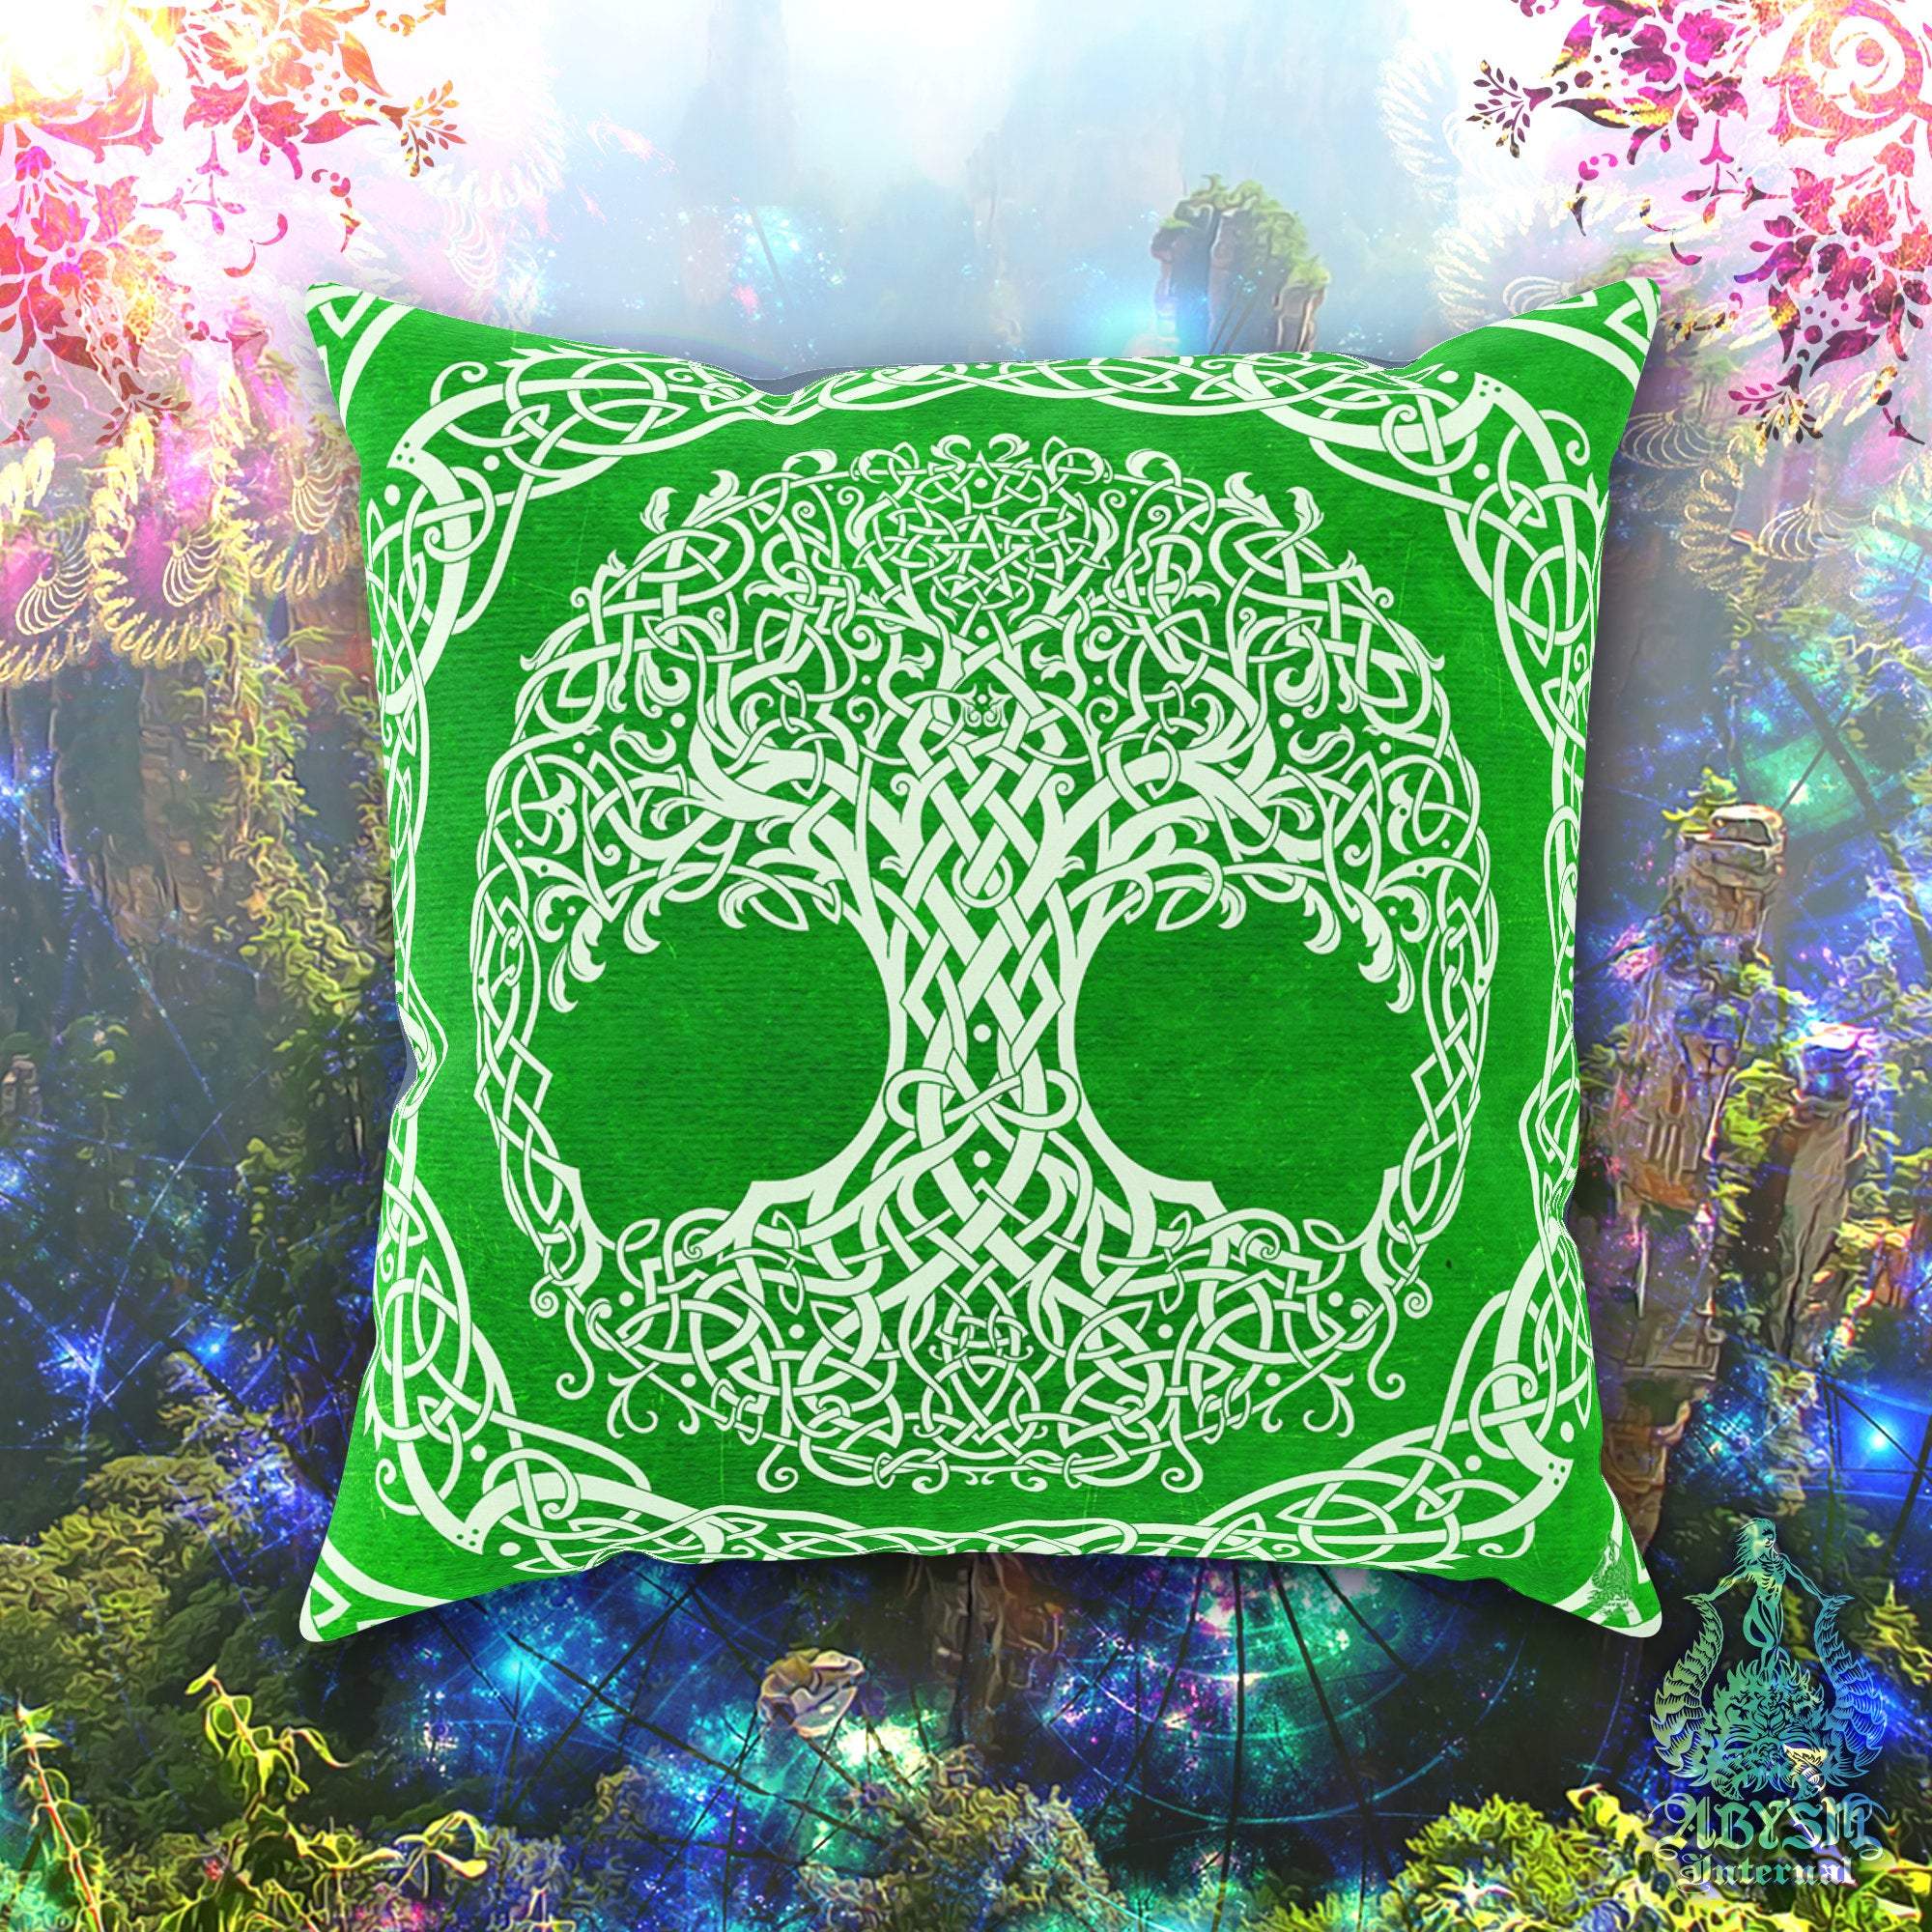 Witch Throw Pillow, Decorative Accent Cushion, Tree of Life, Wicca Room Decor, Witchy Art, Celtic Knot, Funky and Eclectic Home - Green - Abysm Internal